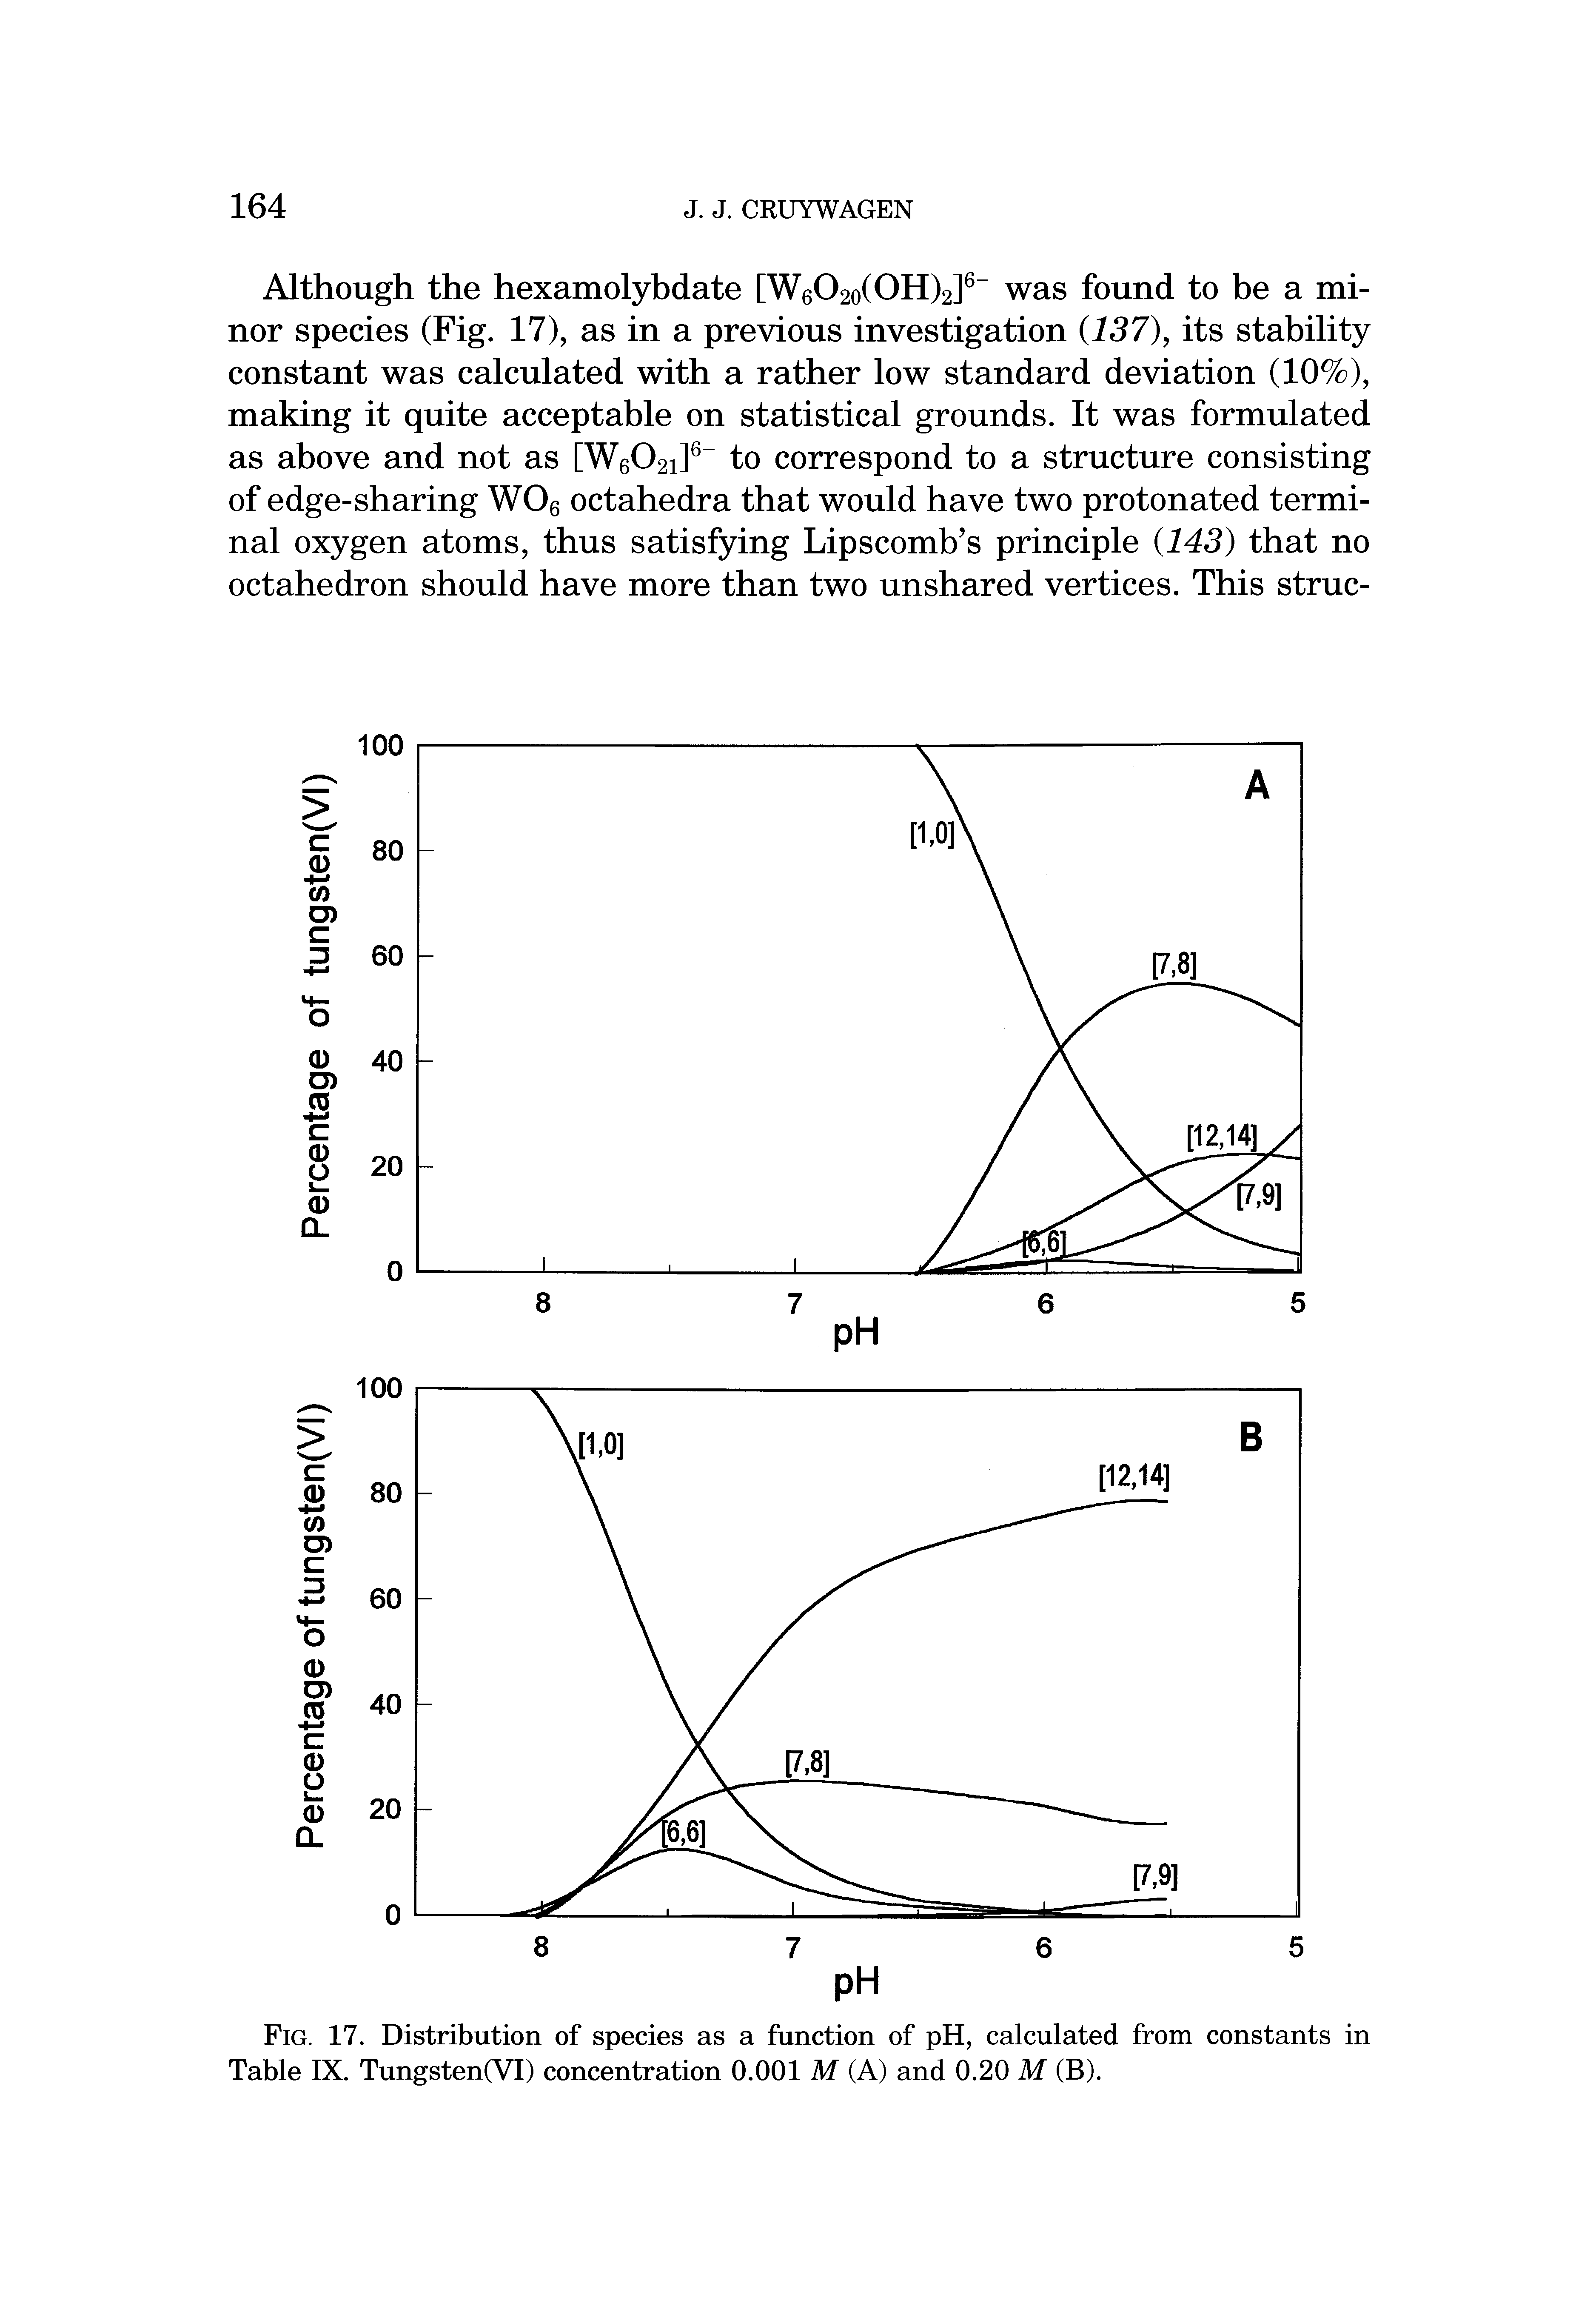 Fig. 17. Distribution of species as a function of pH, calculated from constants in Table IX. Tungsten(VI) concentration 0.001 M (A) and 0.20 M (B).